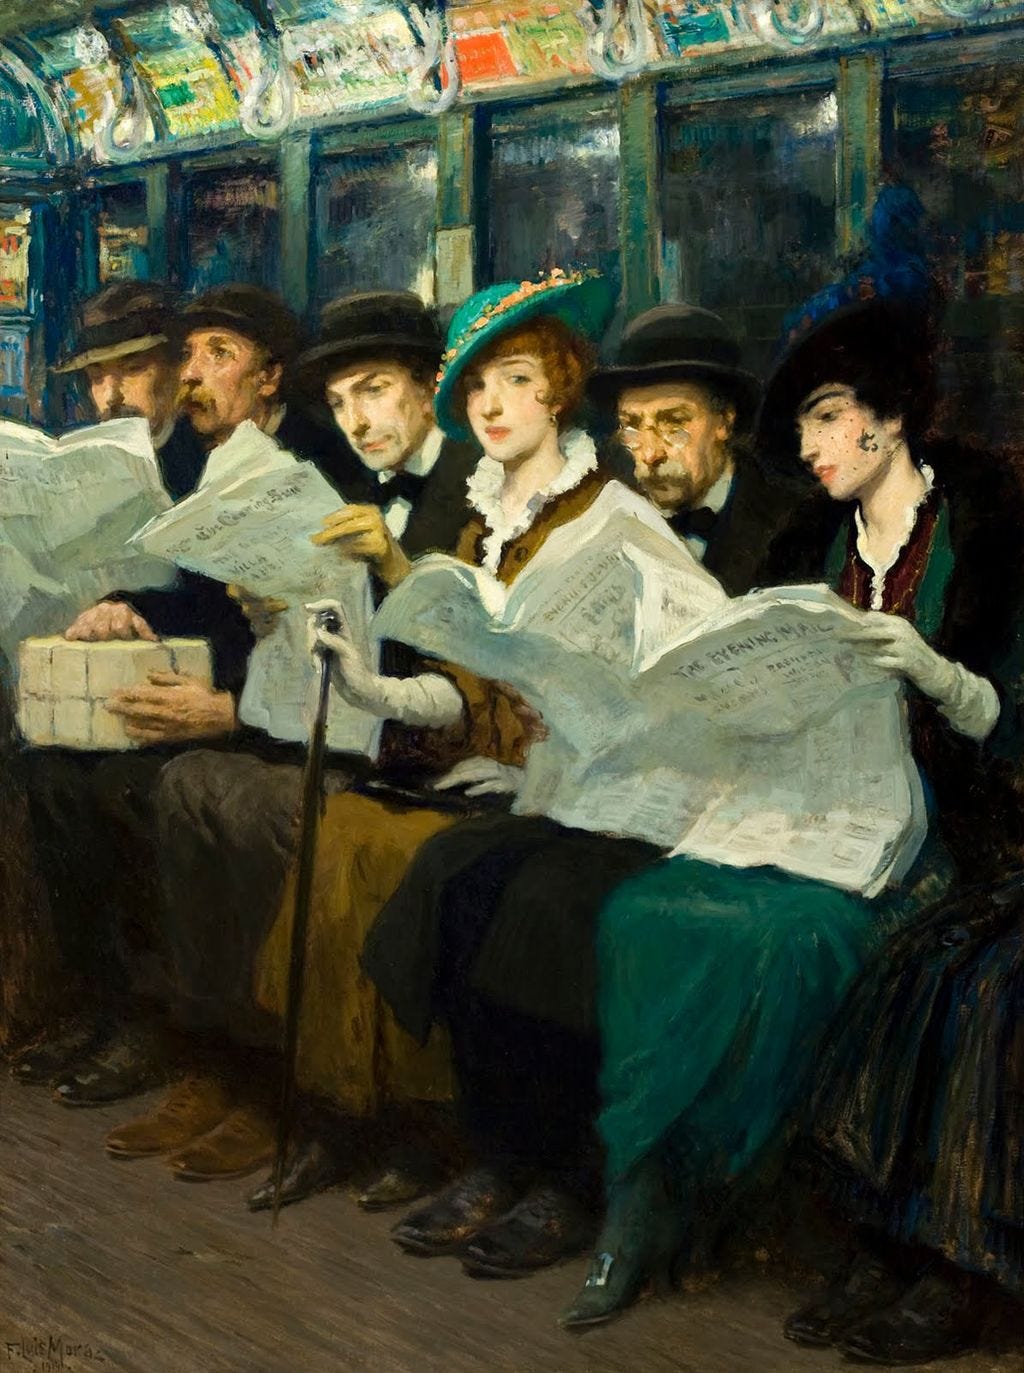 An impressionist painting of New York City subway riders in the early twentieth century, reading newspapers.